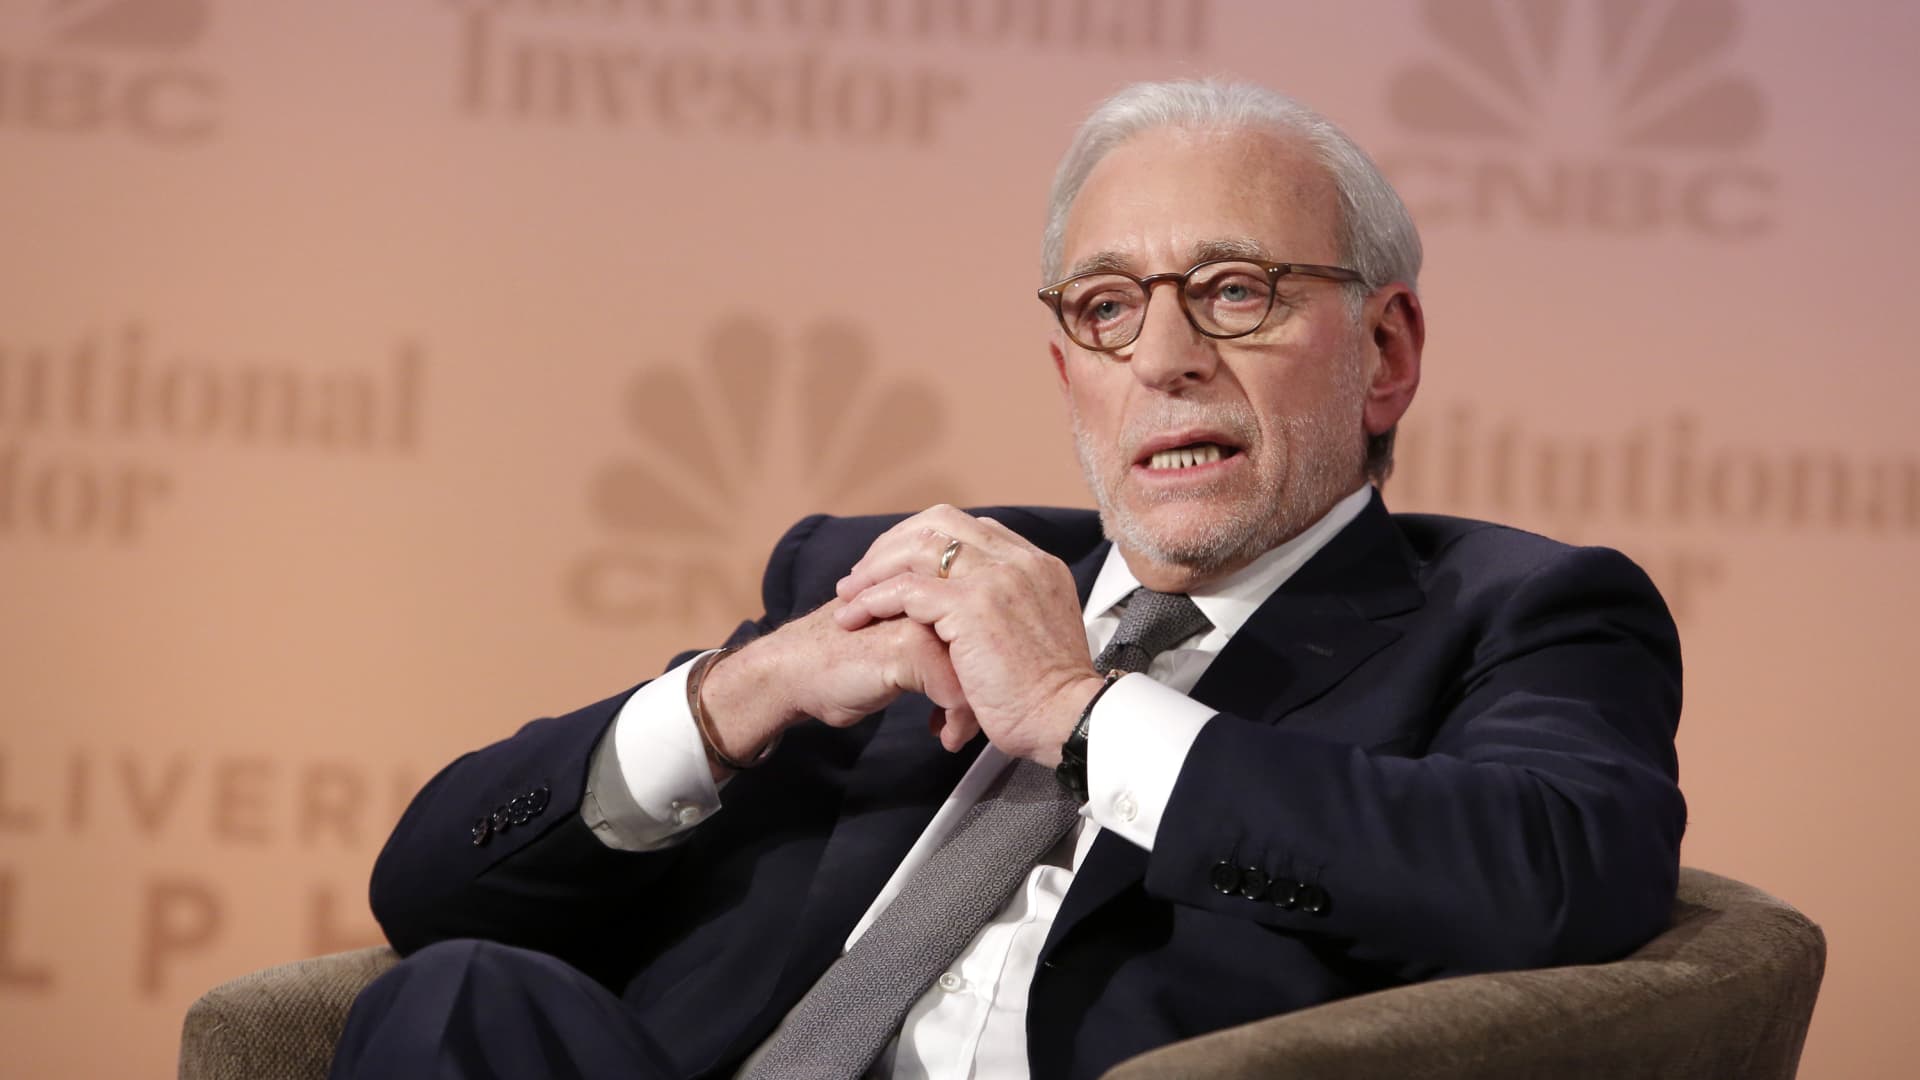 Nelson Peltz, founding partner and CEO of Trian Fund Management, speaks with CNBC's Andrew Ross Sorkin on July 17, 2013 in New York.